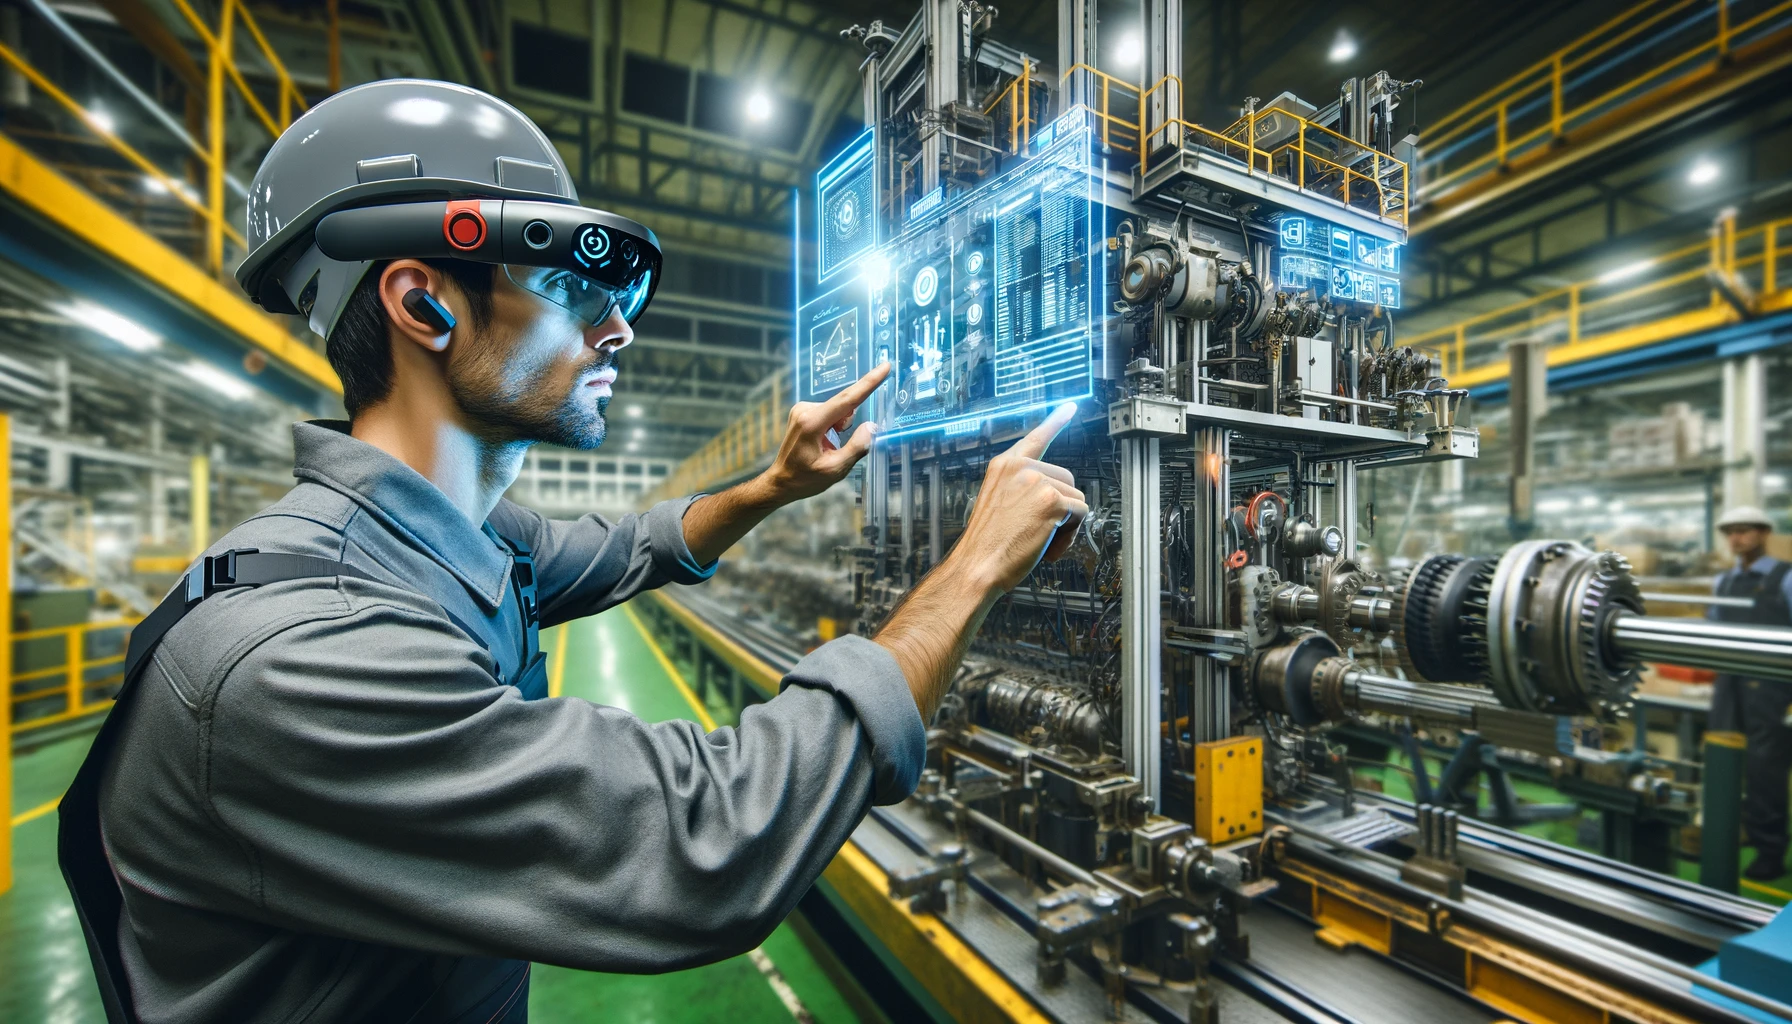 A factory worker using augmented reality glasses to receive real-time operational instructions while working on an assembly line. The image shows the worker next to complex machinery, with technical data and assembly instructions superimposed.